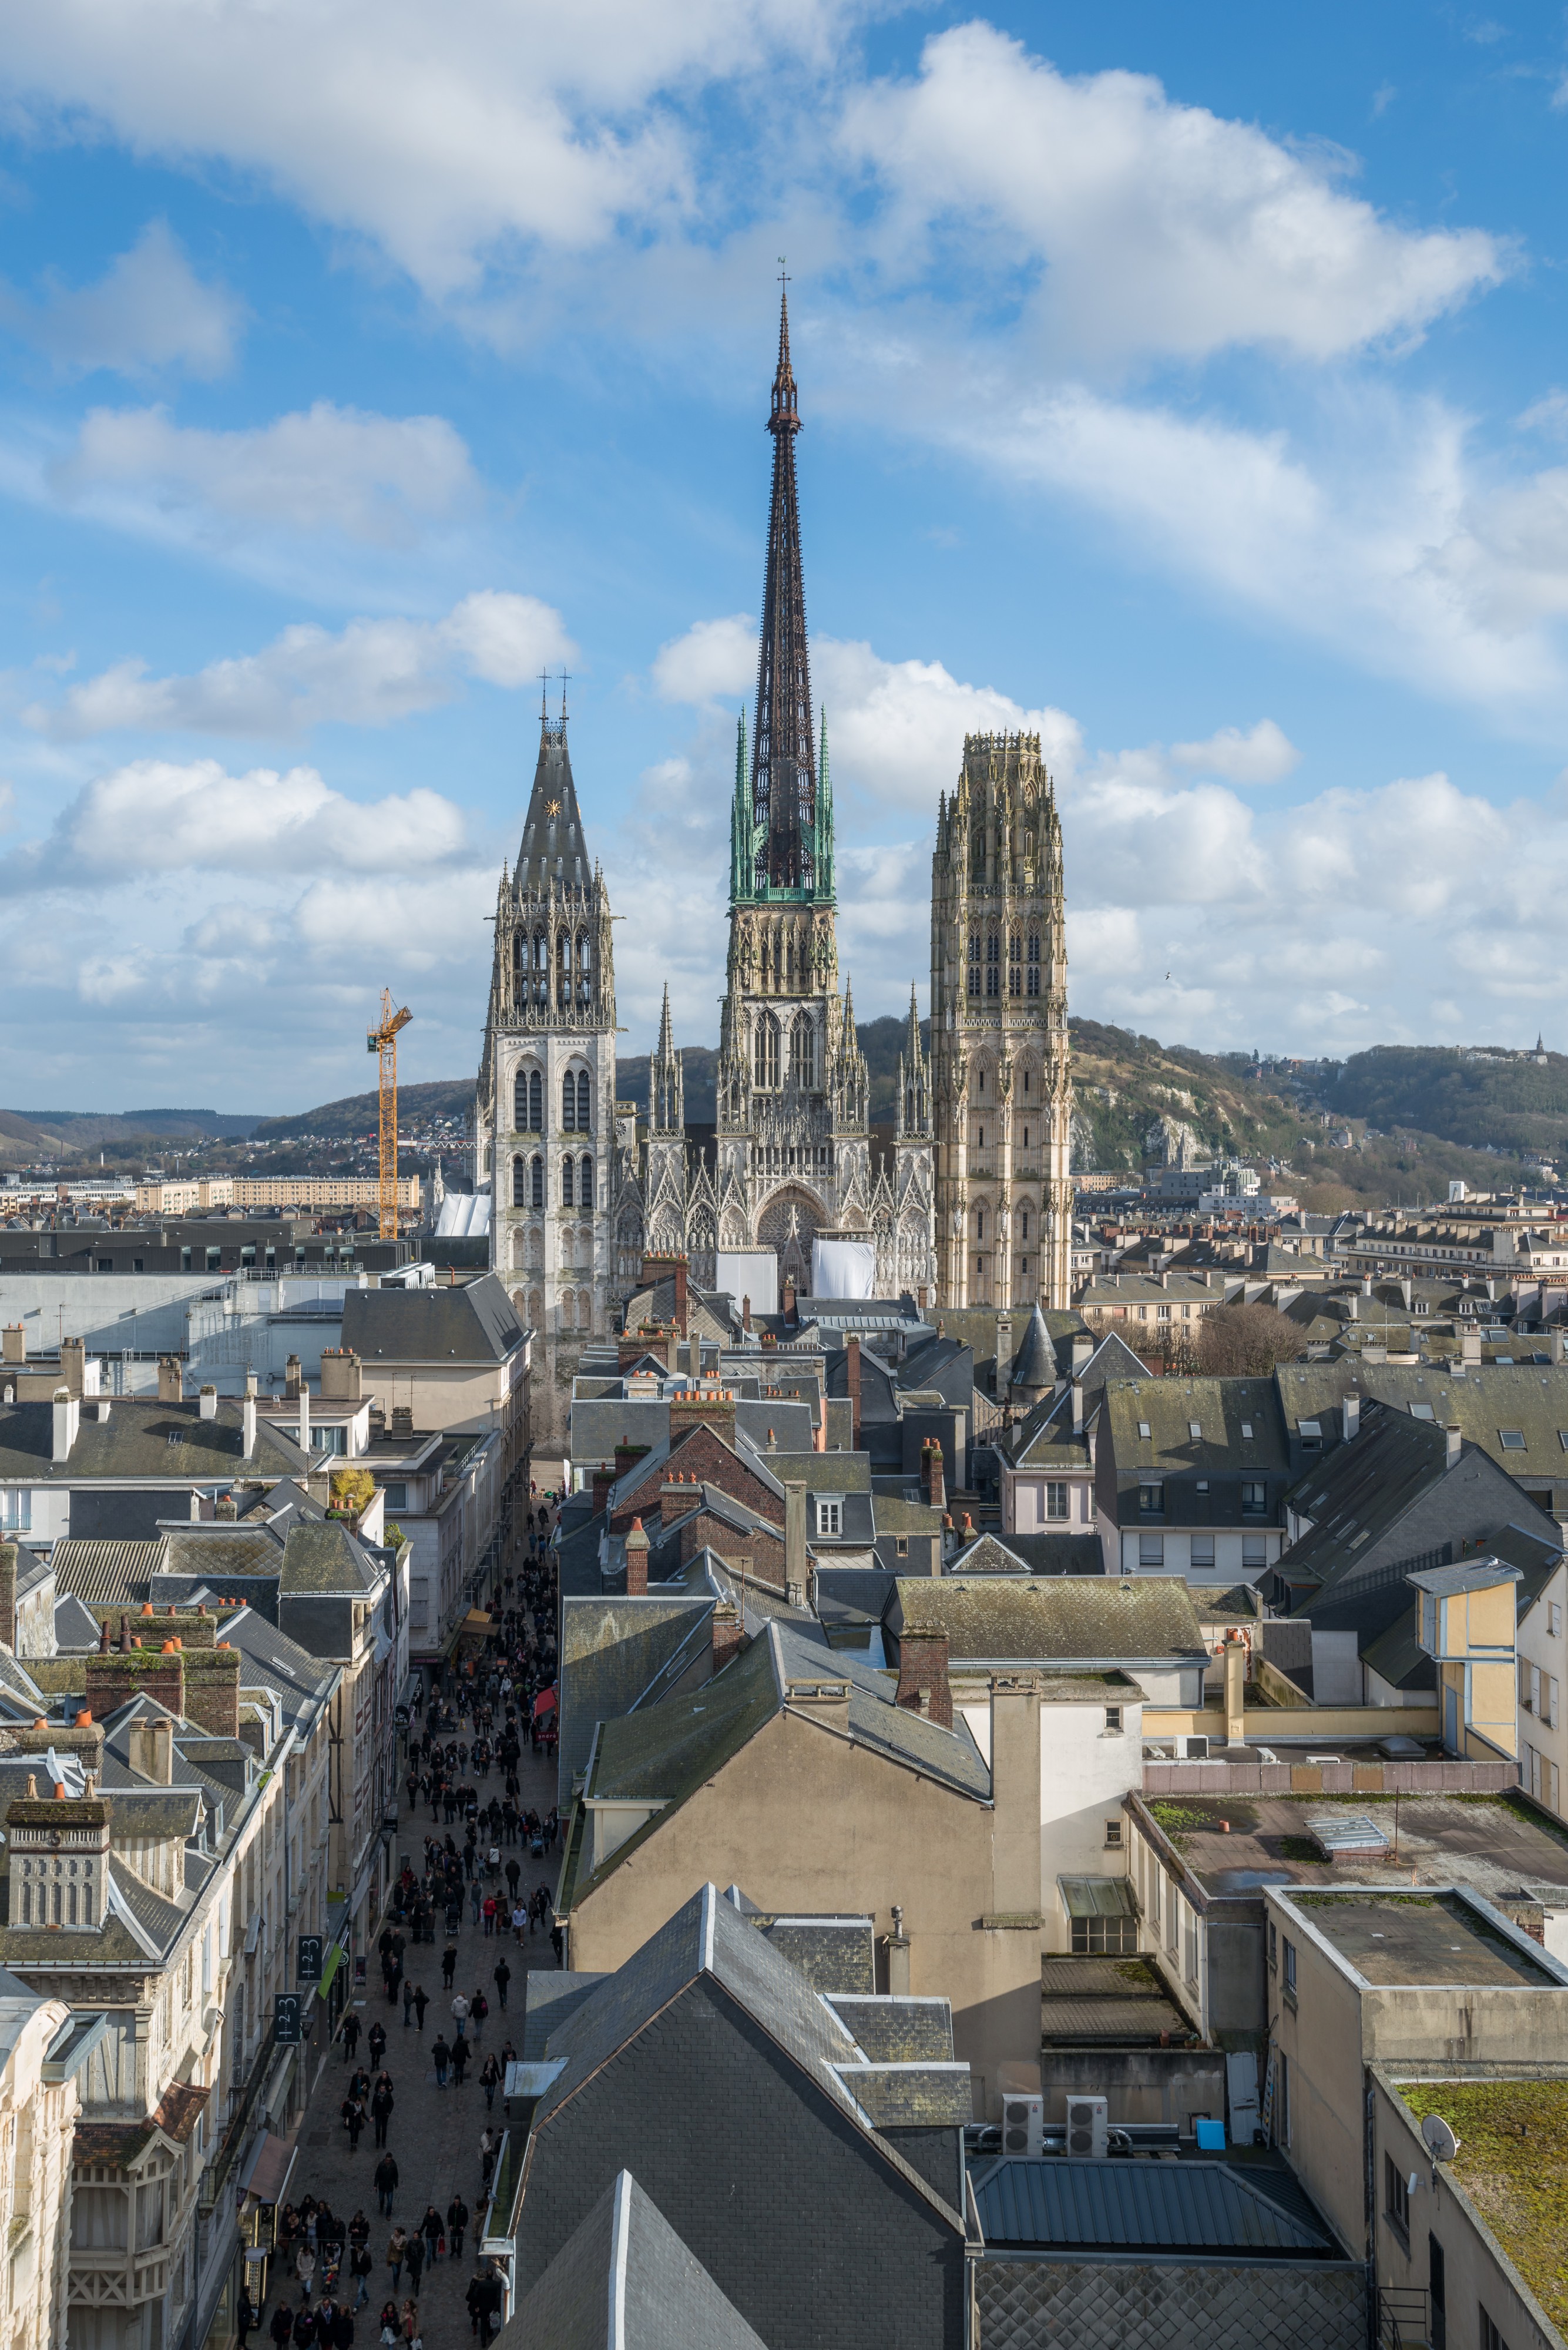 Rouen Cathedral and Rue de Gros Horloge as seen from Gros Horloge 140215 2